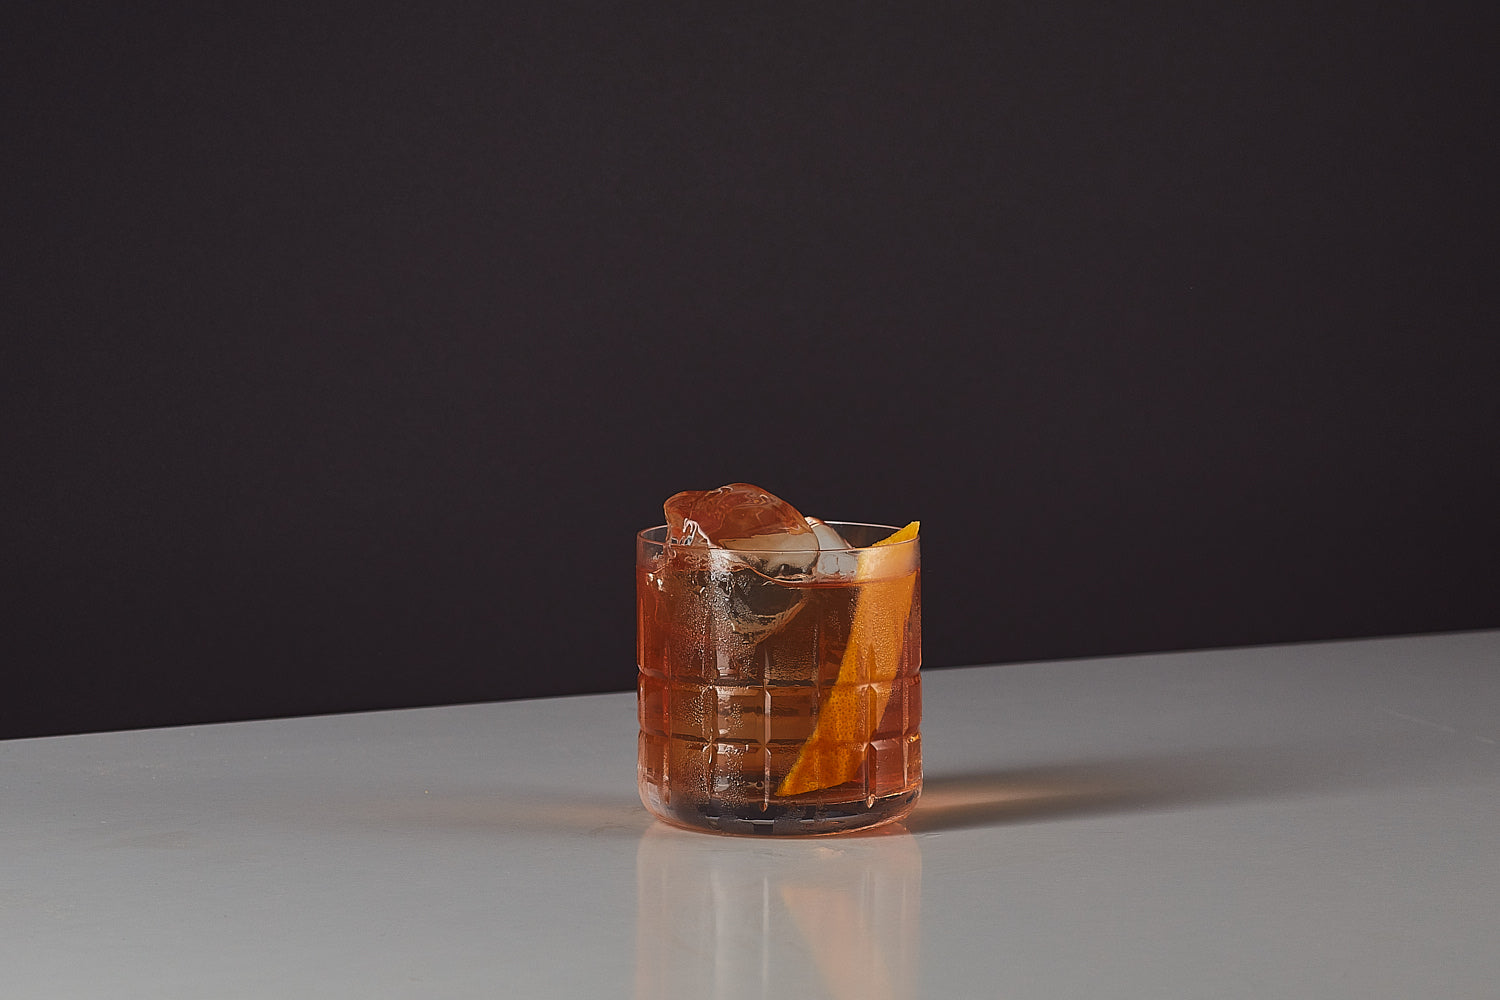 Image of an Old Fashioned original recipe premixed ready to drink whiskey cocktail from Craft Cocktails in a tumbler glass with ice and an orange peel garnish shot on a black and grey background